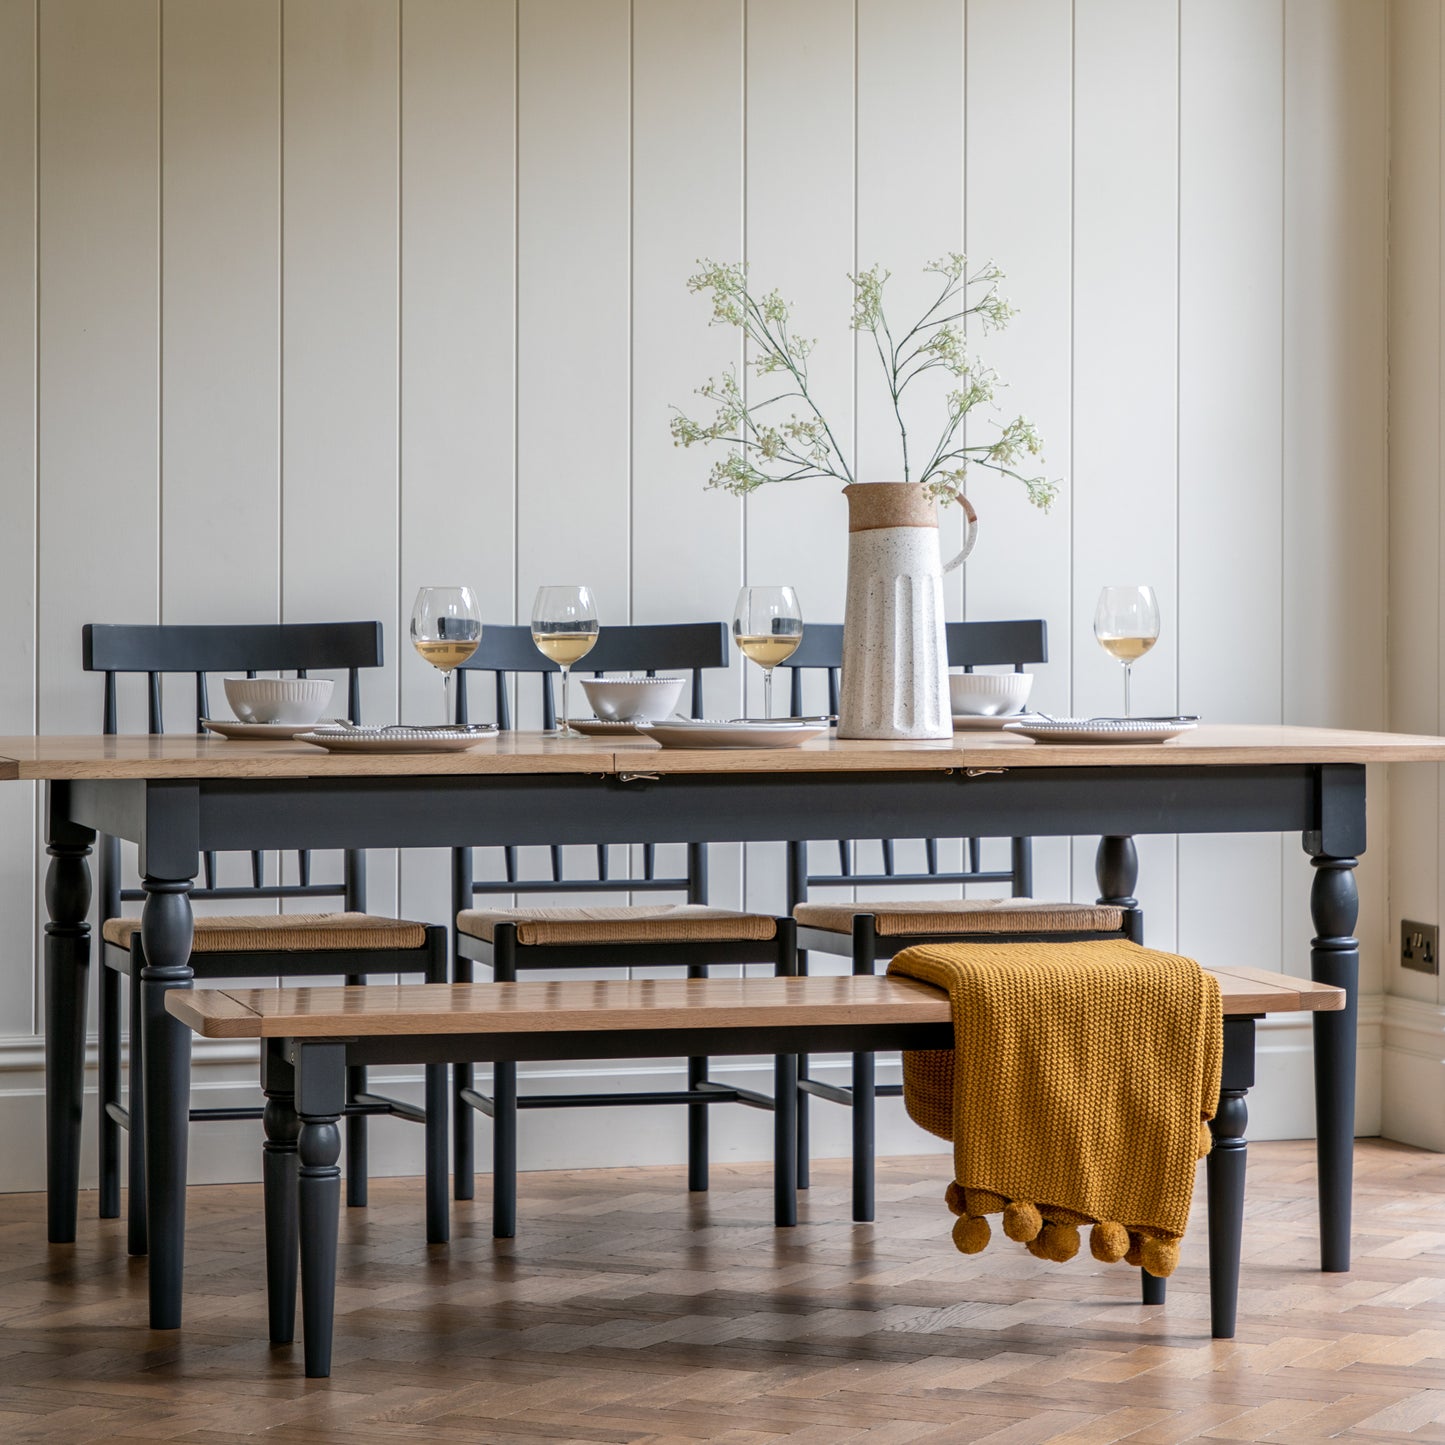 Load image into Gallery viewer, A Buckland Extending Dining Table from Kikiathome.co.uk, perfect for home furniture and interior decor, includes chairs and a bench.
